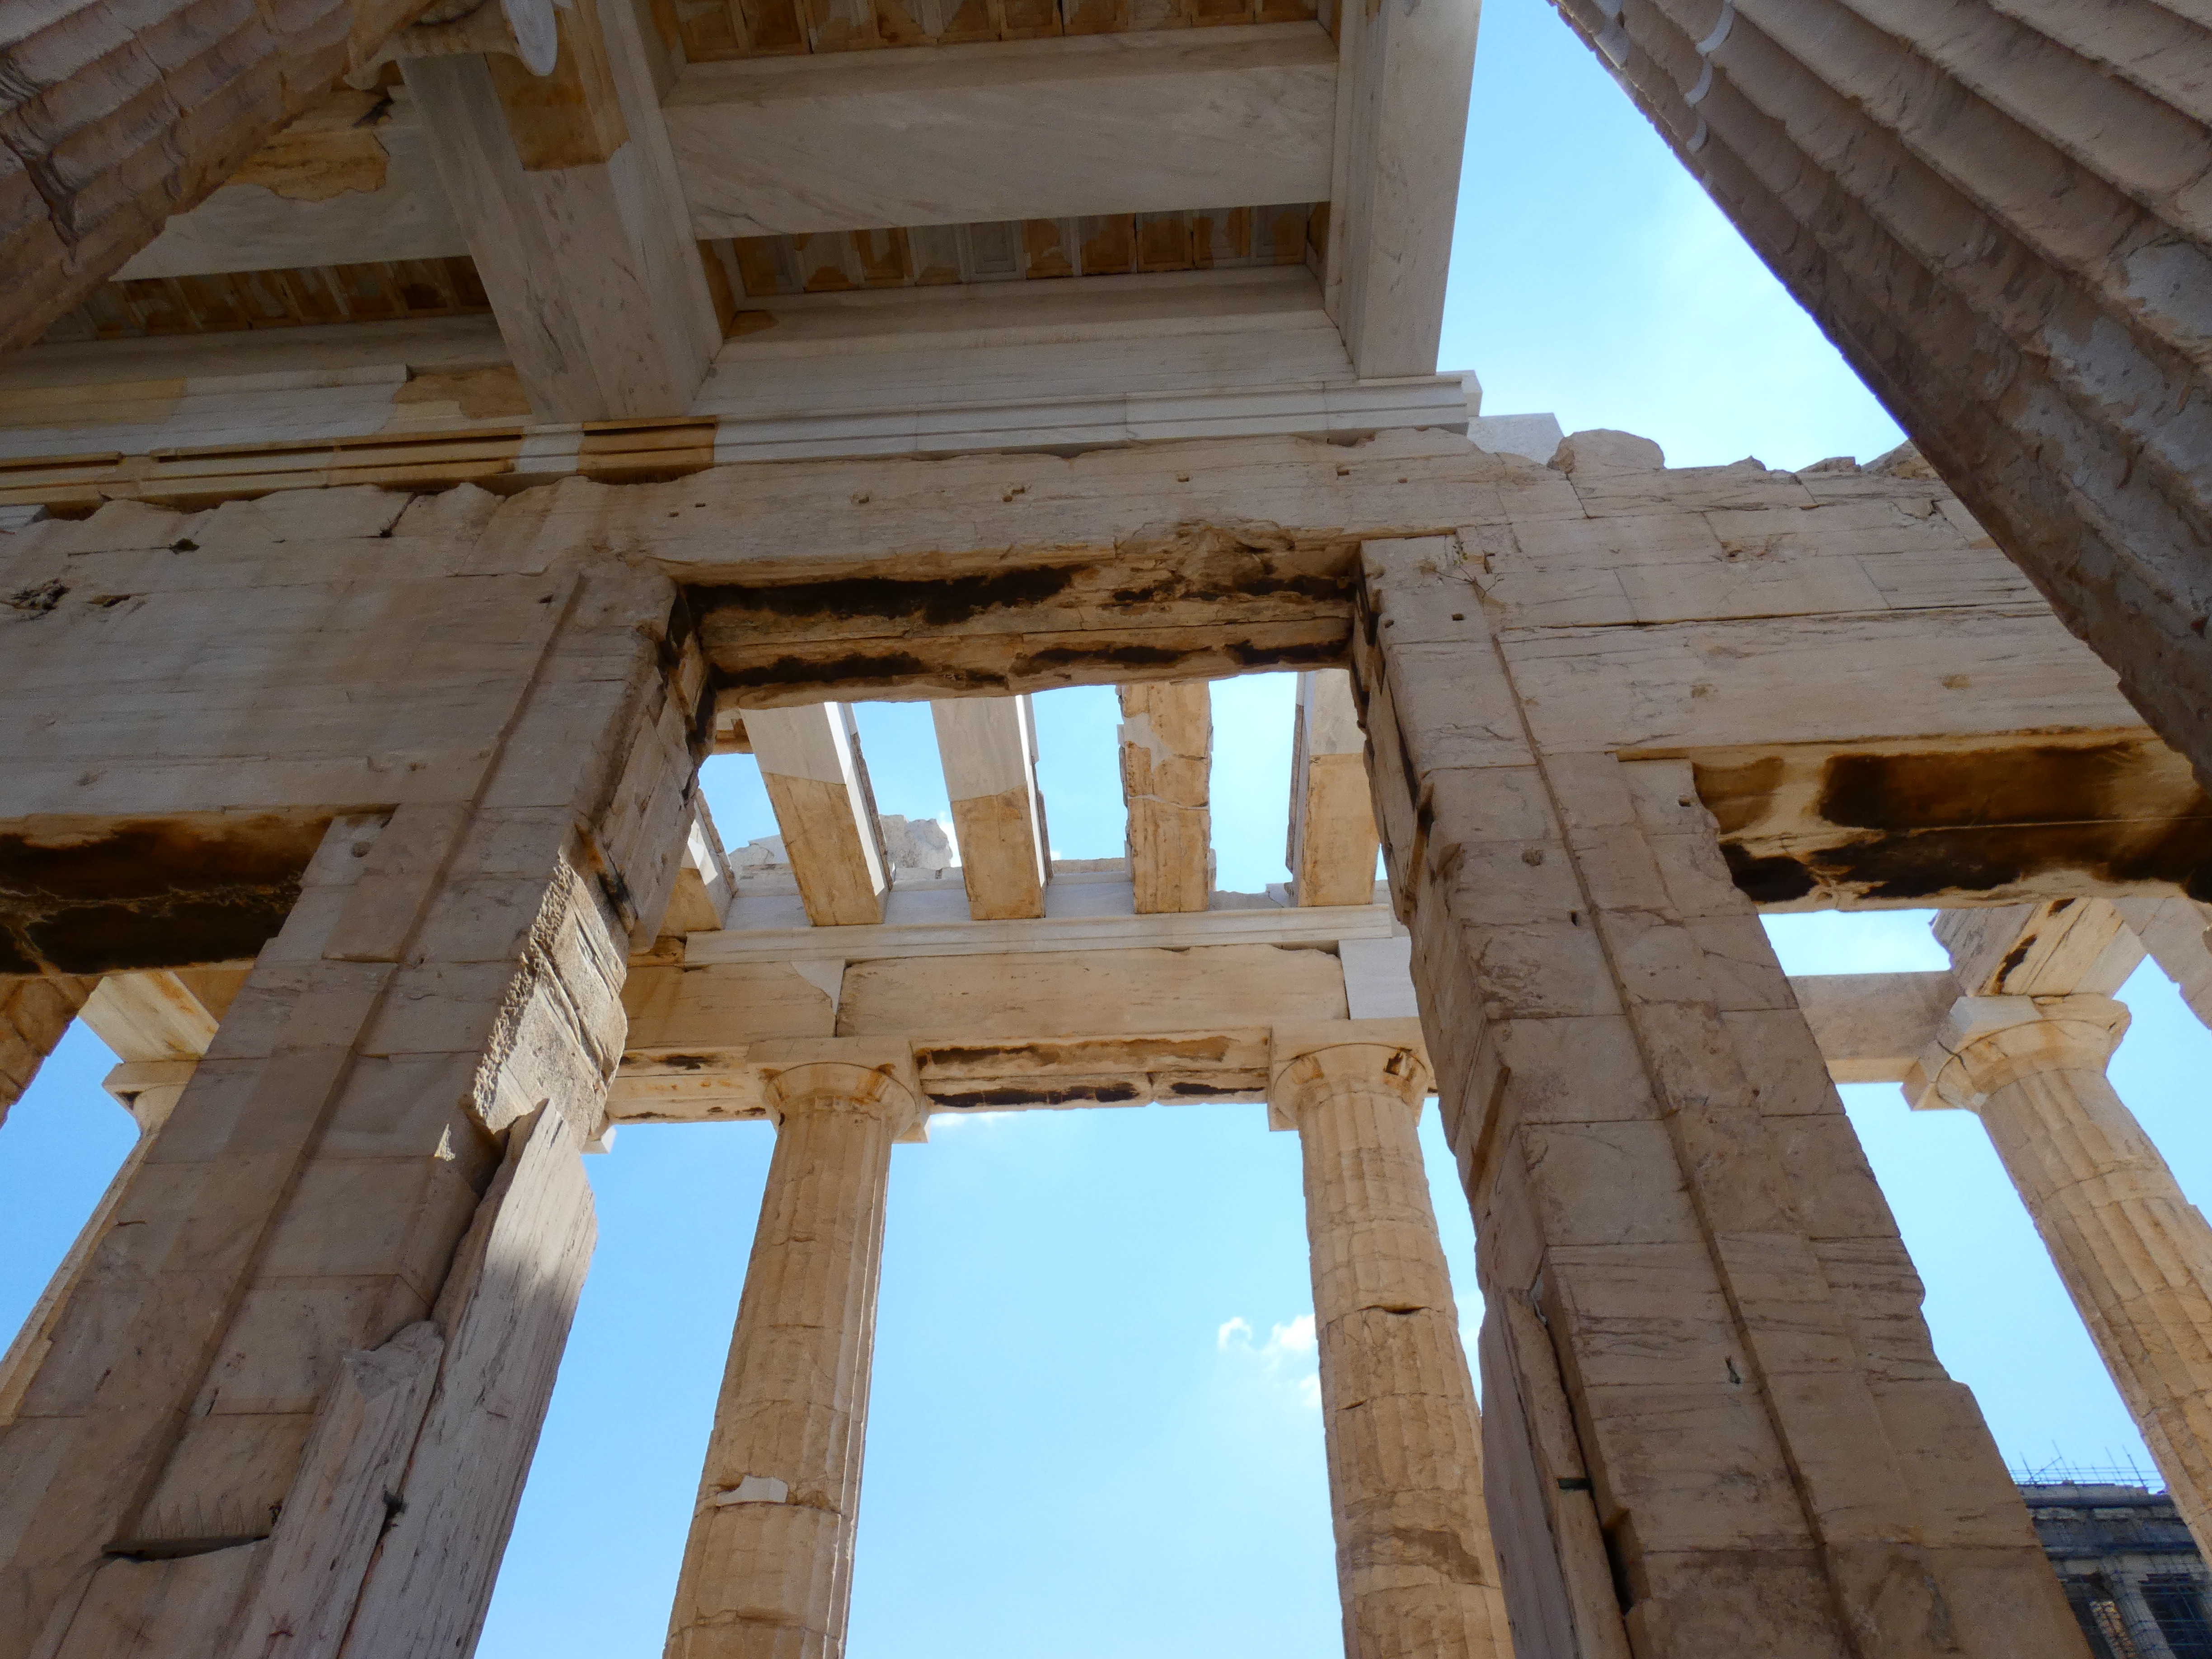 Acropolis opening hours